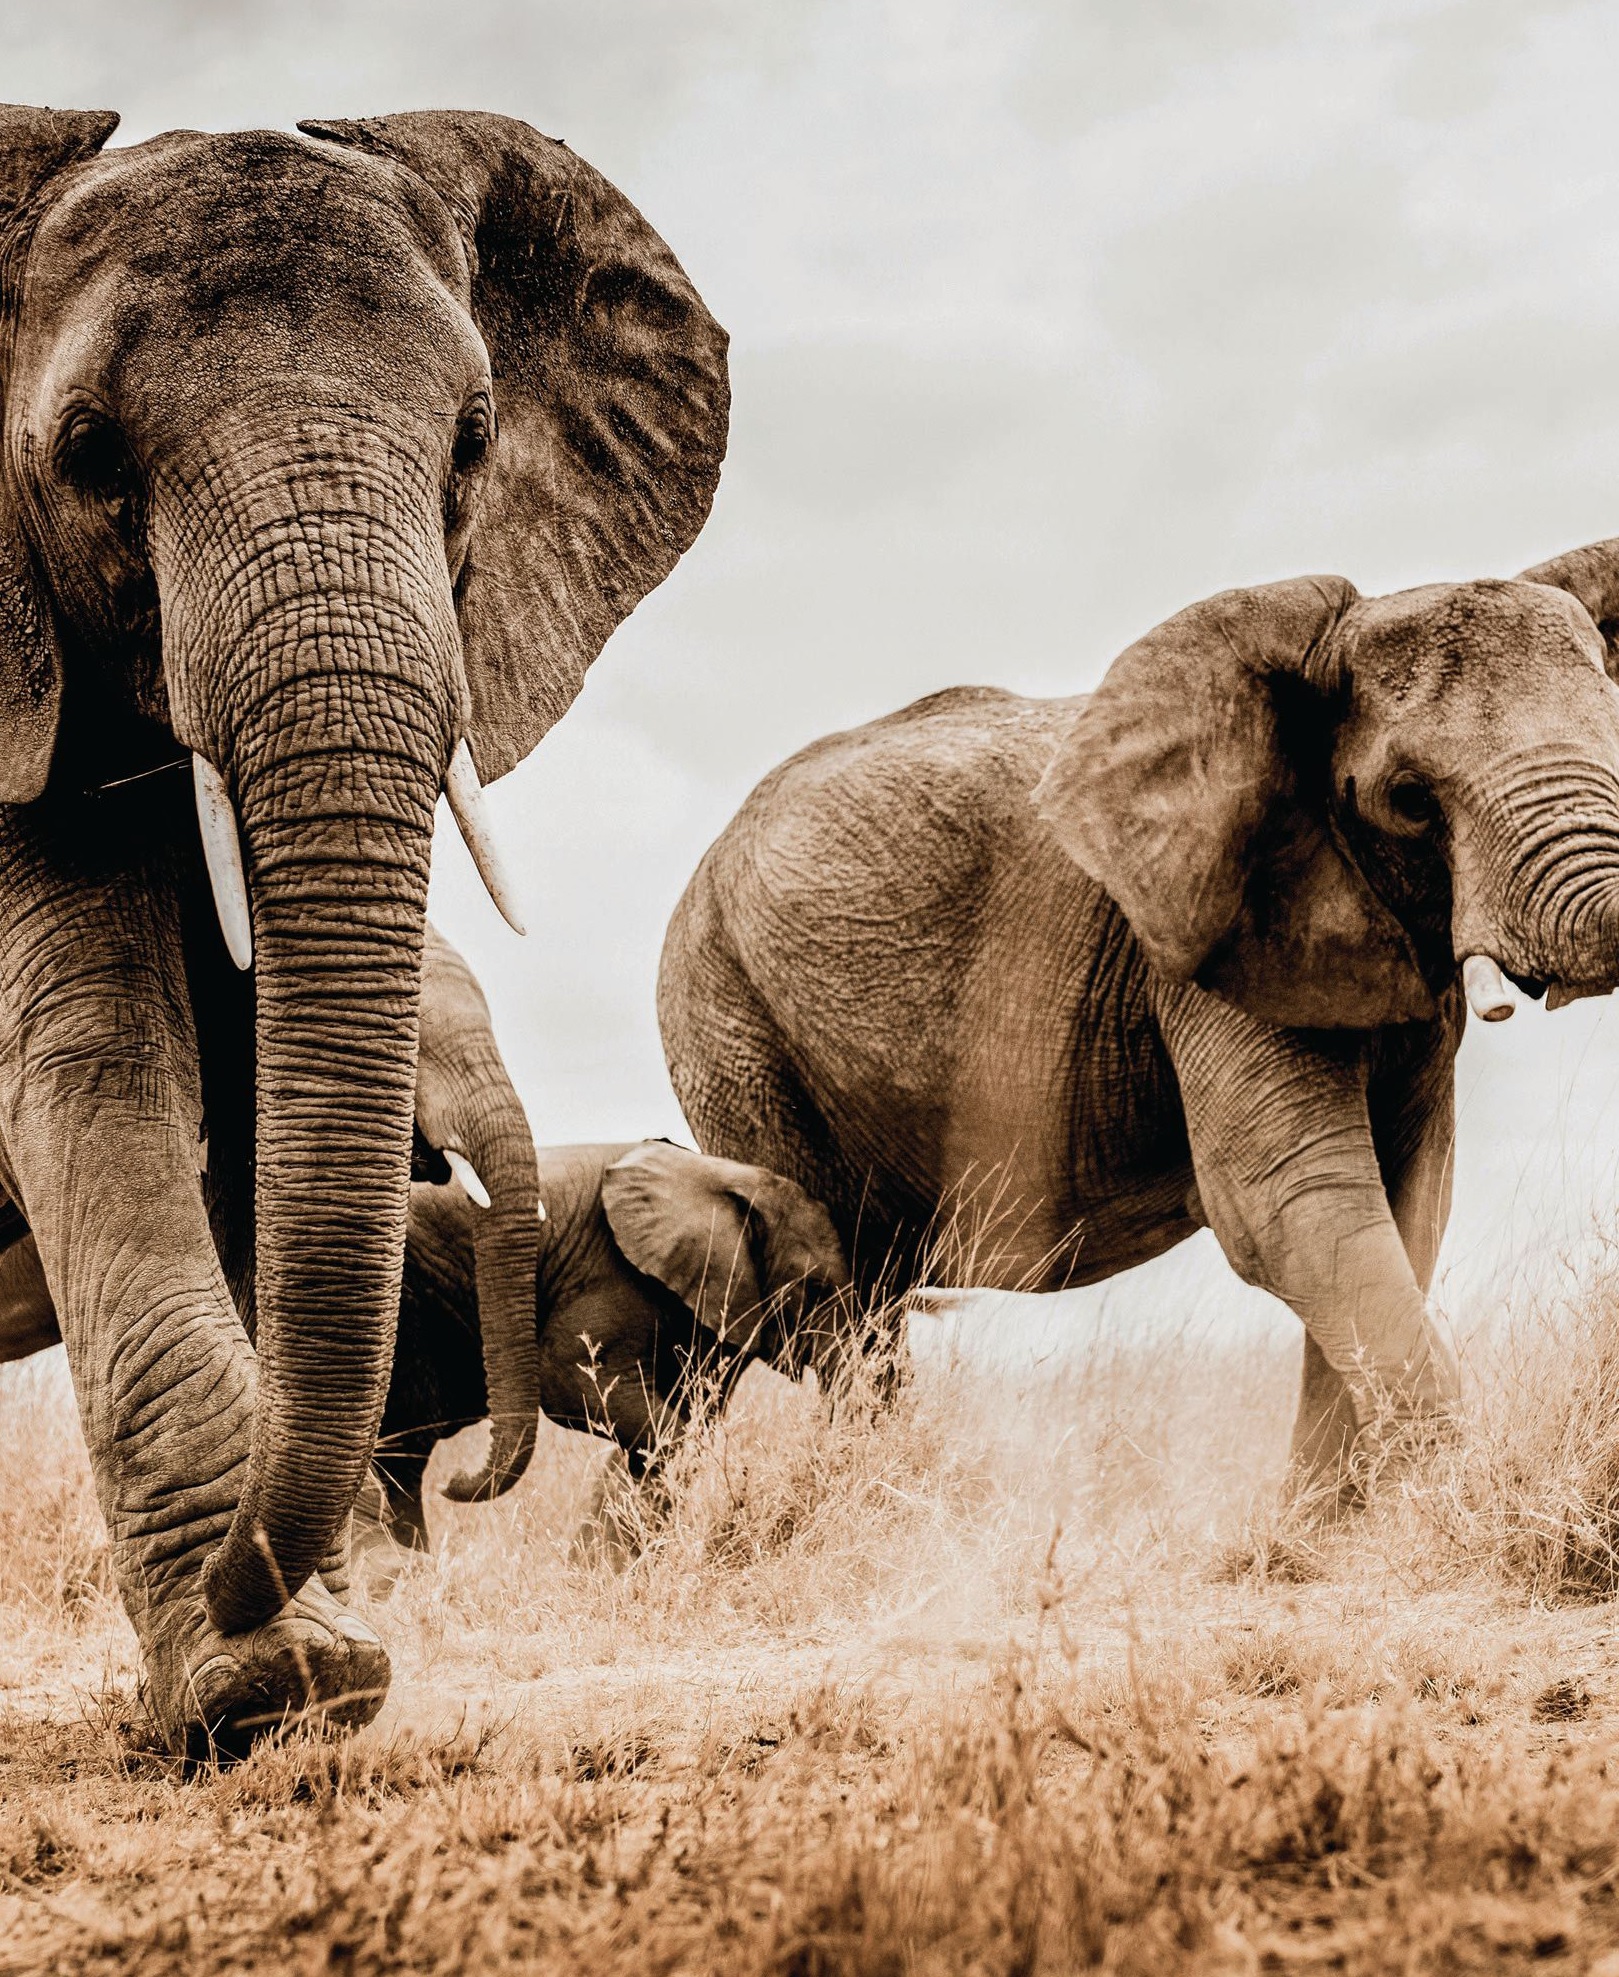 A family of elephants from the photographer’s Africa collection. Photographed by Guadalupe Laiz